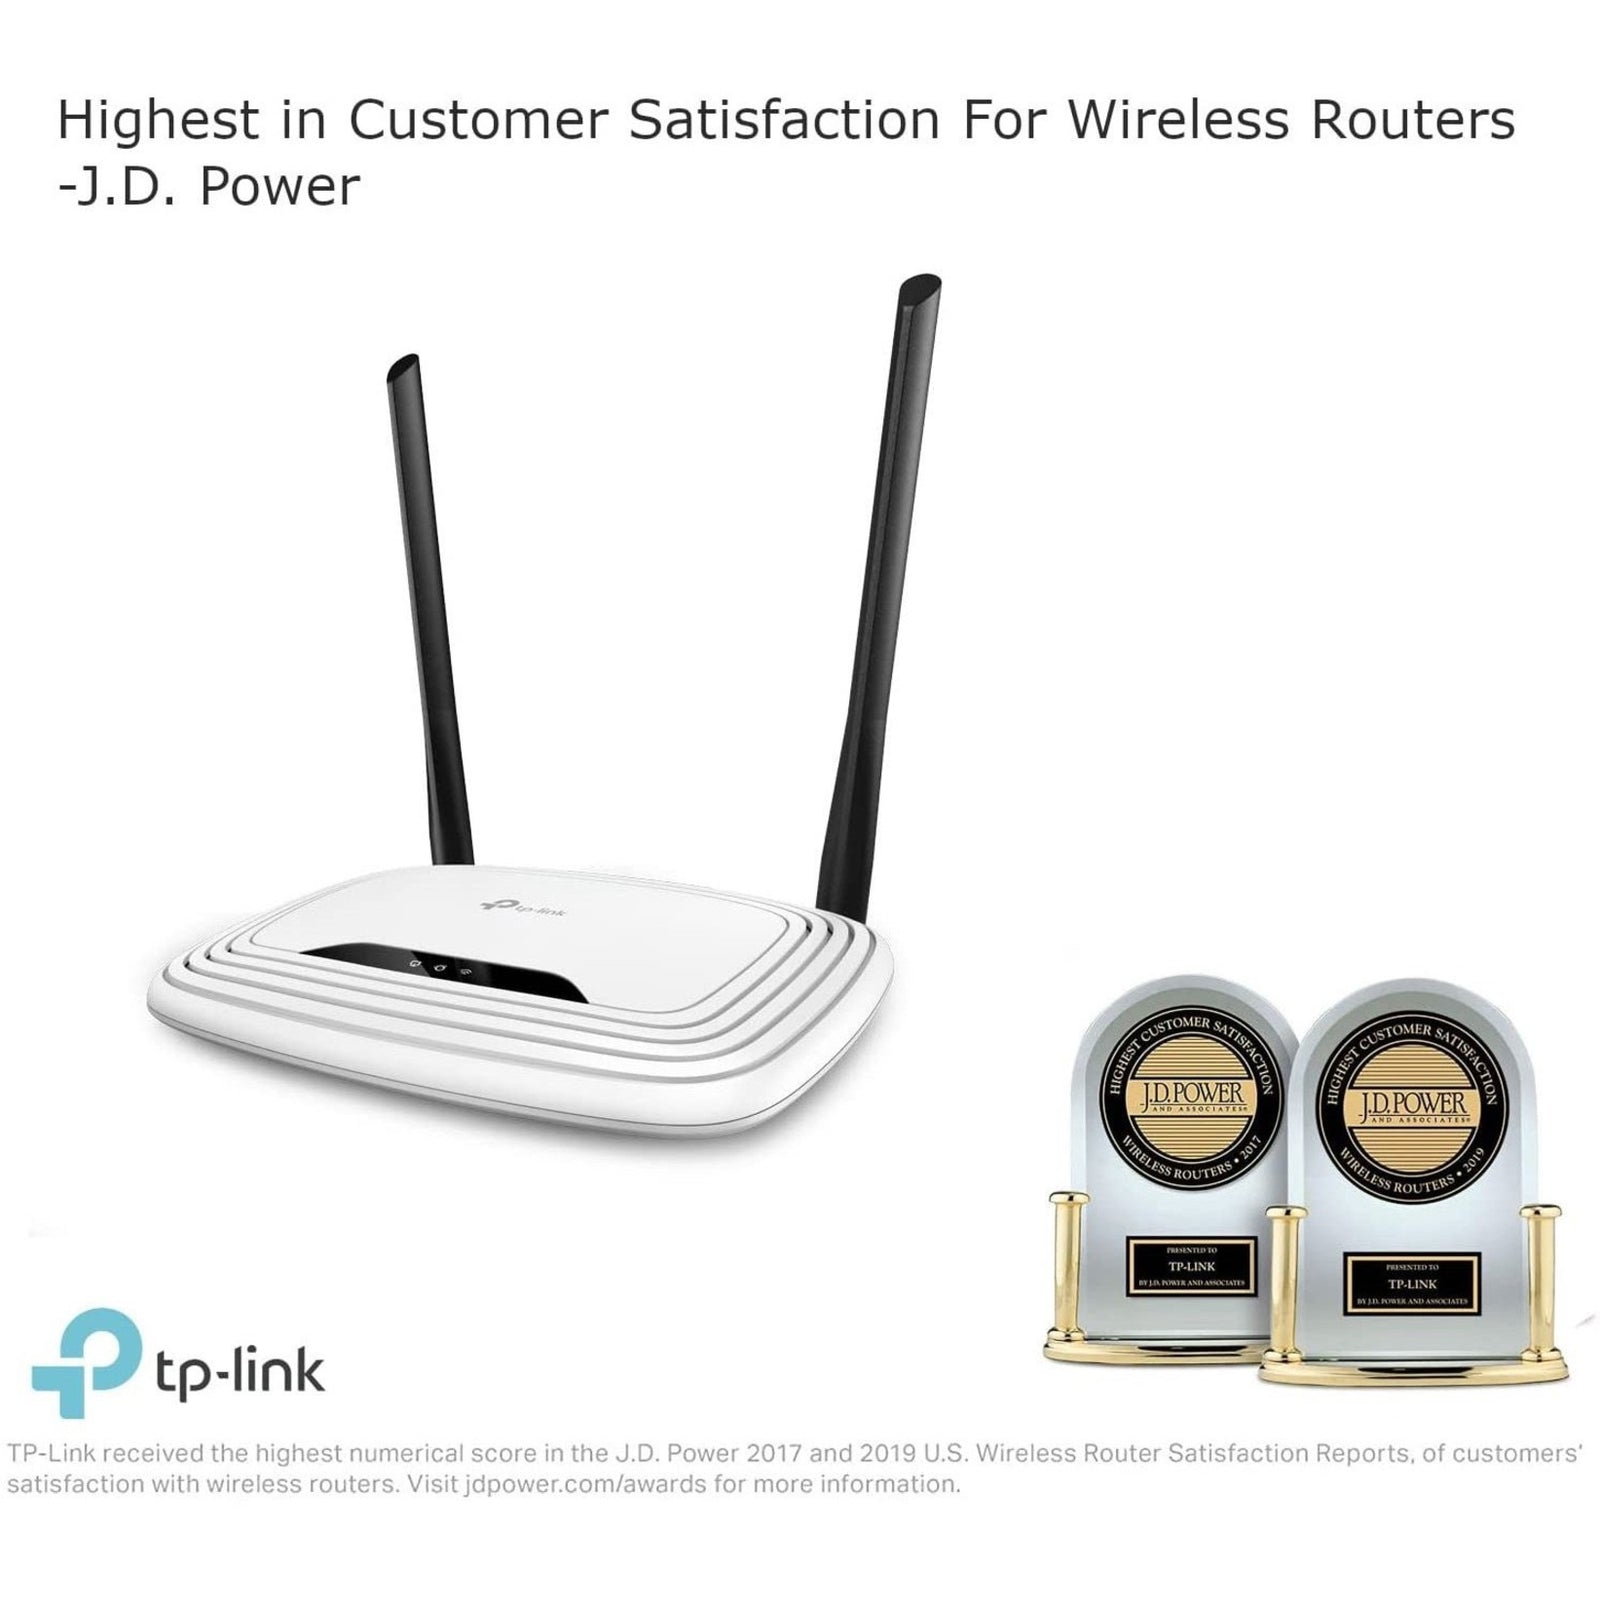 TP-LINK TL-WR841N - Wireless N300 Home Router, 300Mpbs, IP QoS, WPS Button (TL-WR841N) Alternate-Image2 image